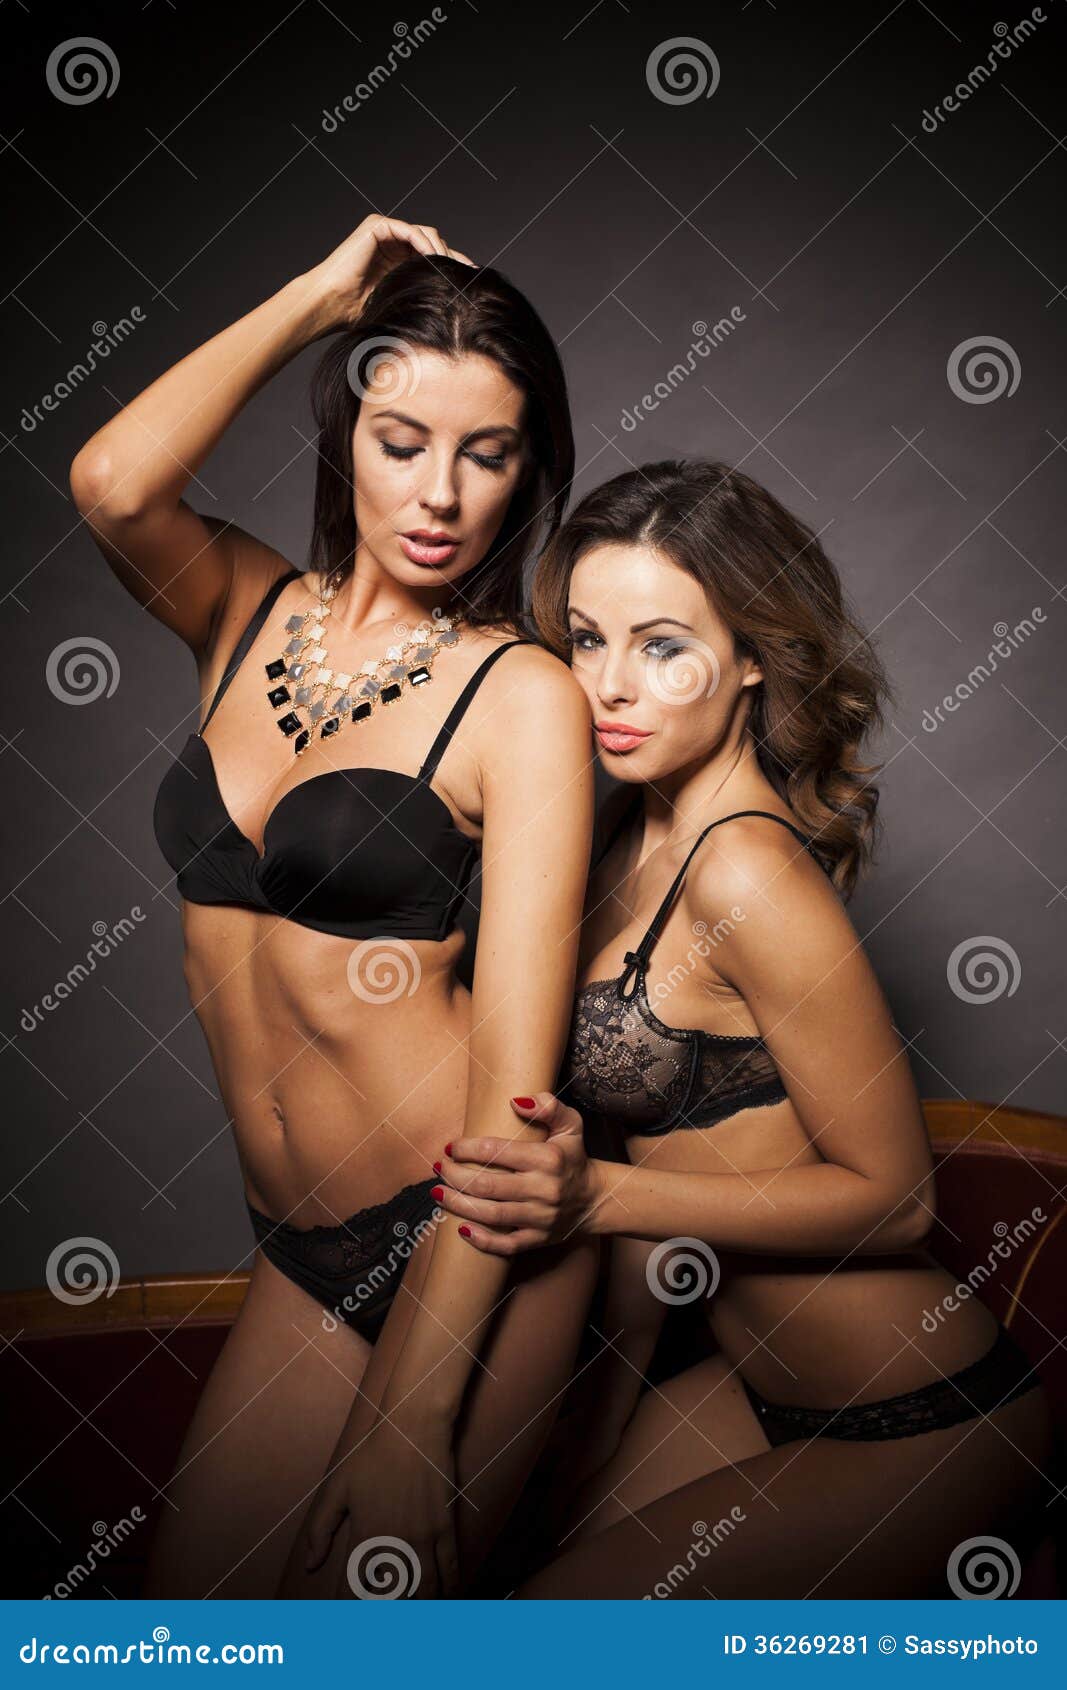 https://thumbs.dreamstime.com/z/two-sexy-lesbian-lingerie-women-hugging-gray-isolated-background-36269281.jpg